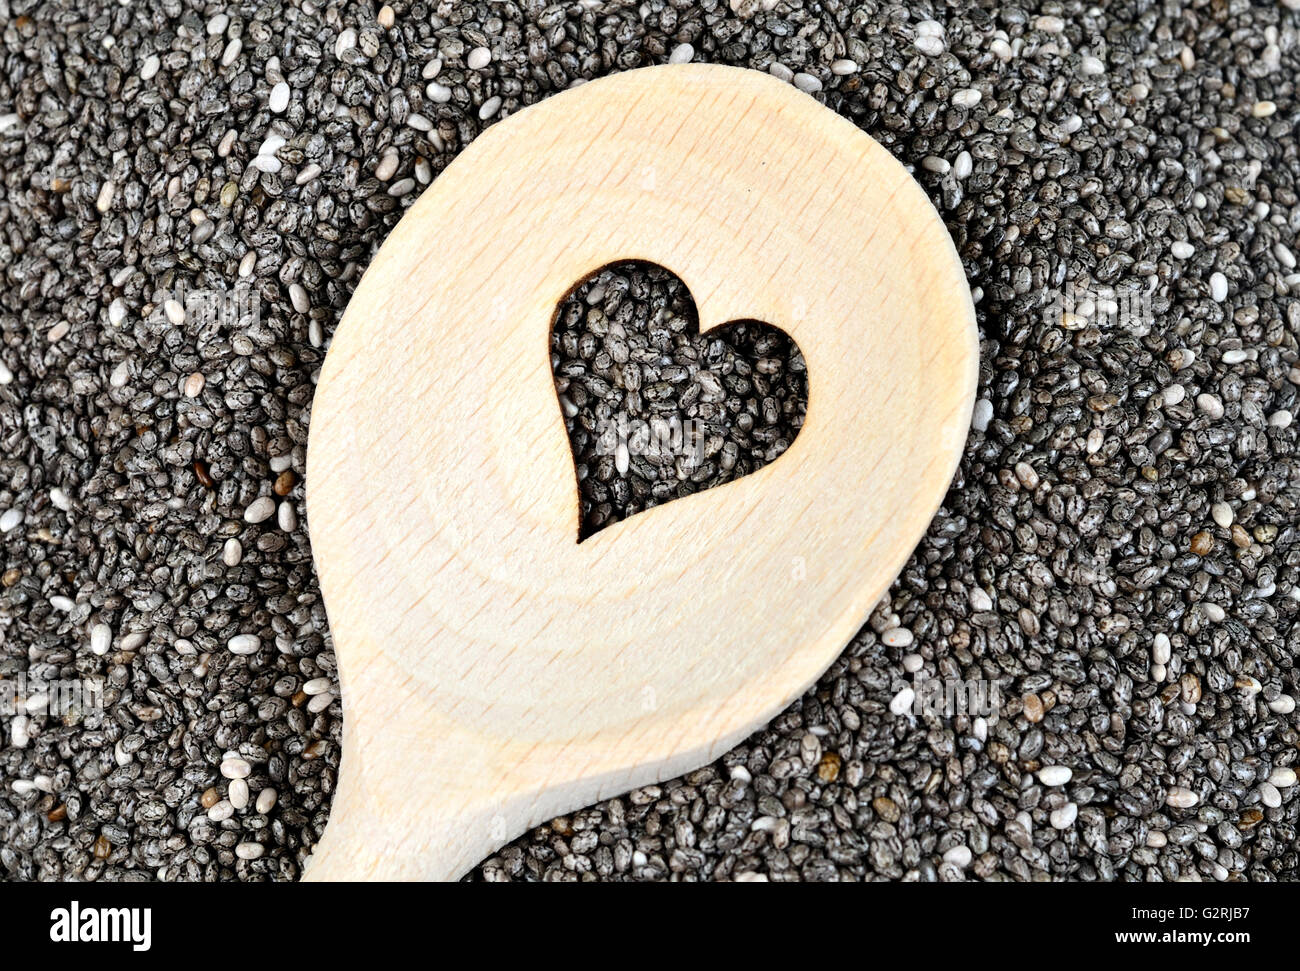 Wooden spoon with heart shape cutted on chia seeds on background Stock Photo